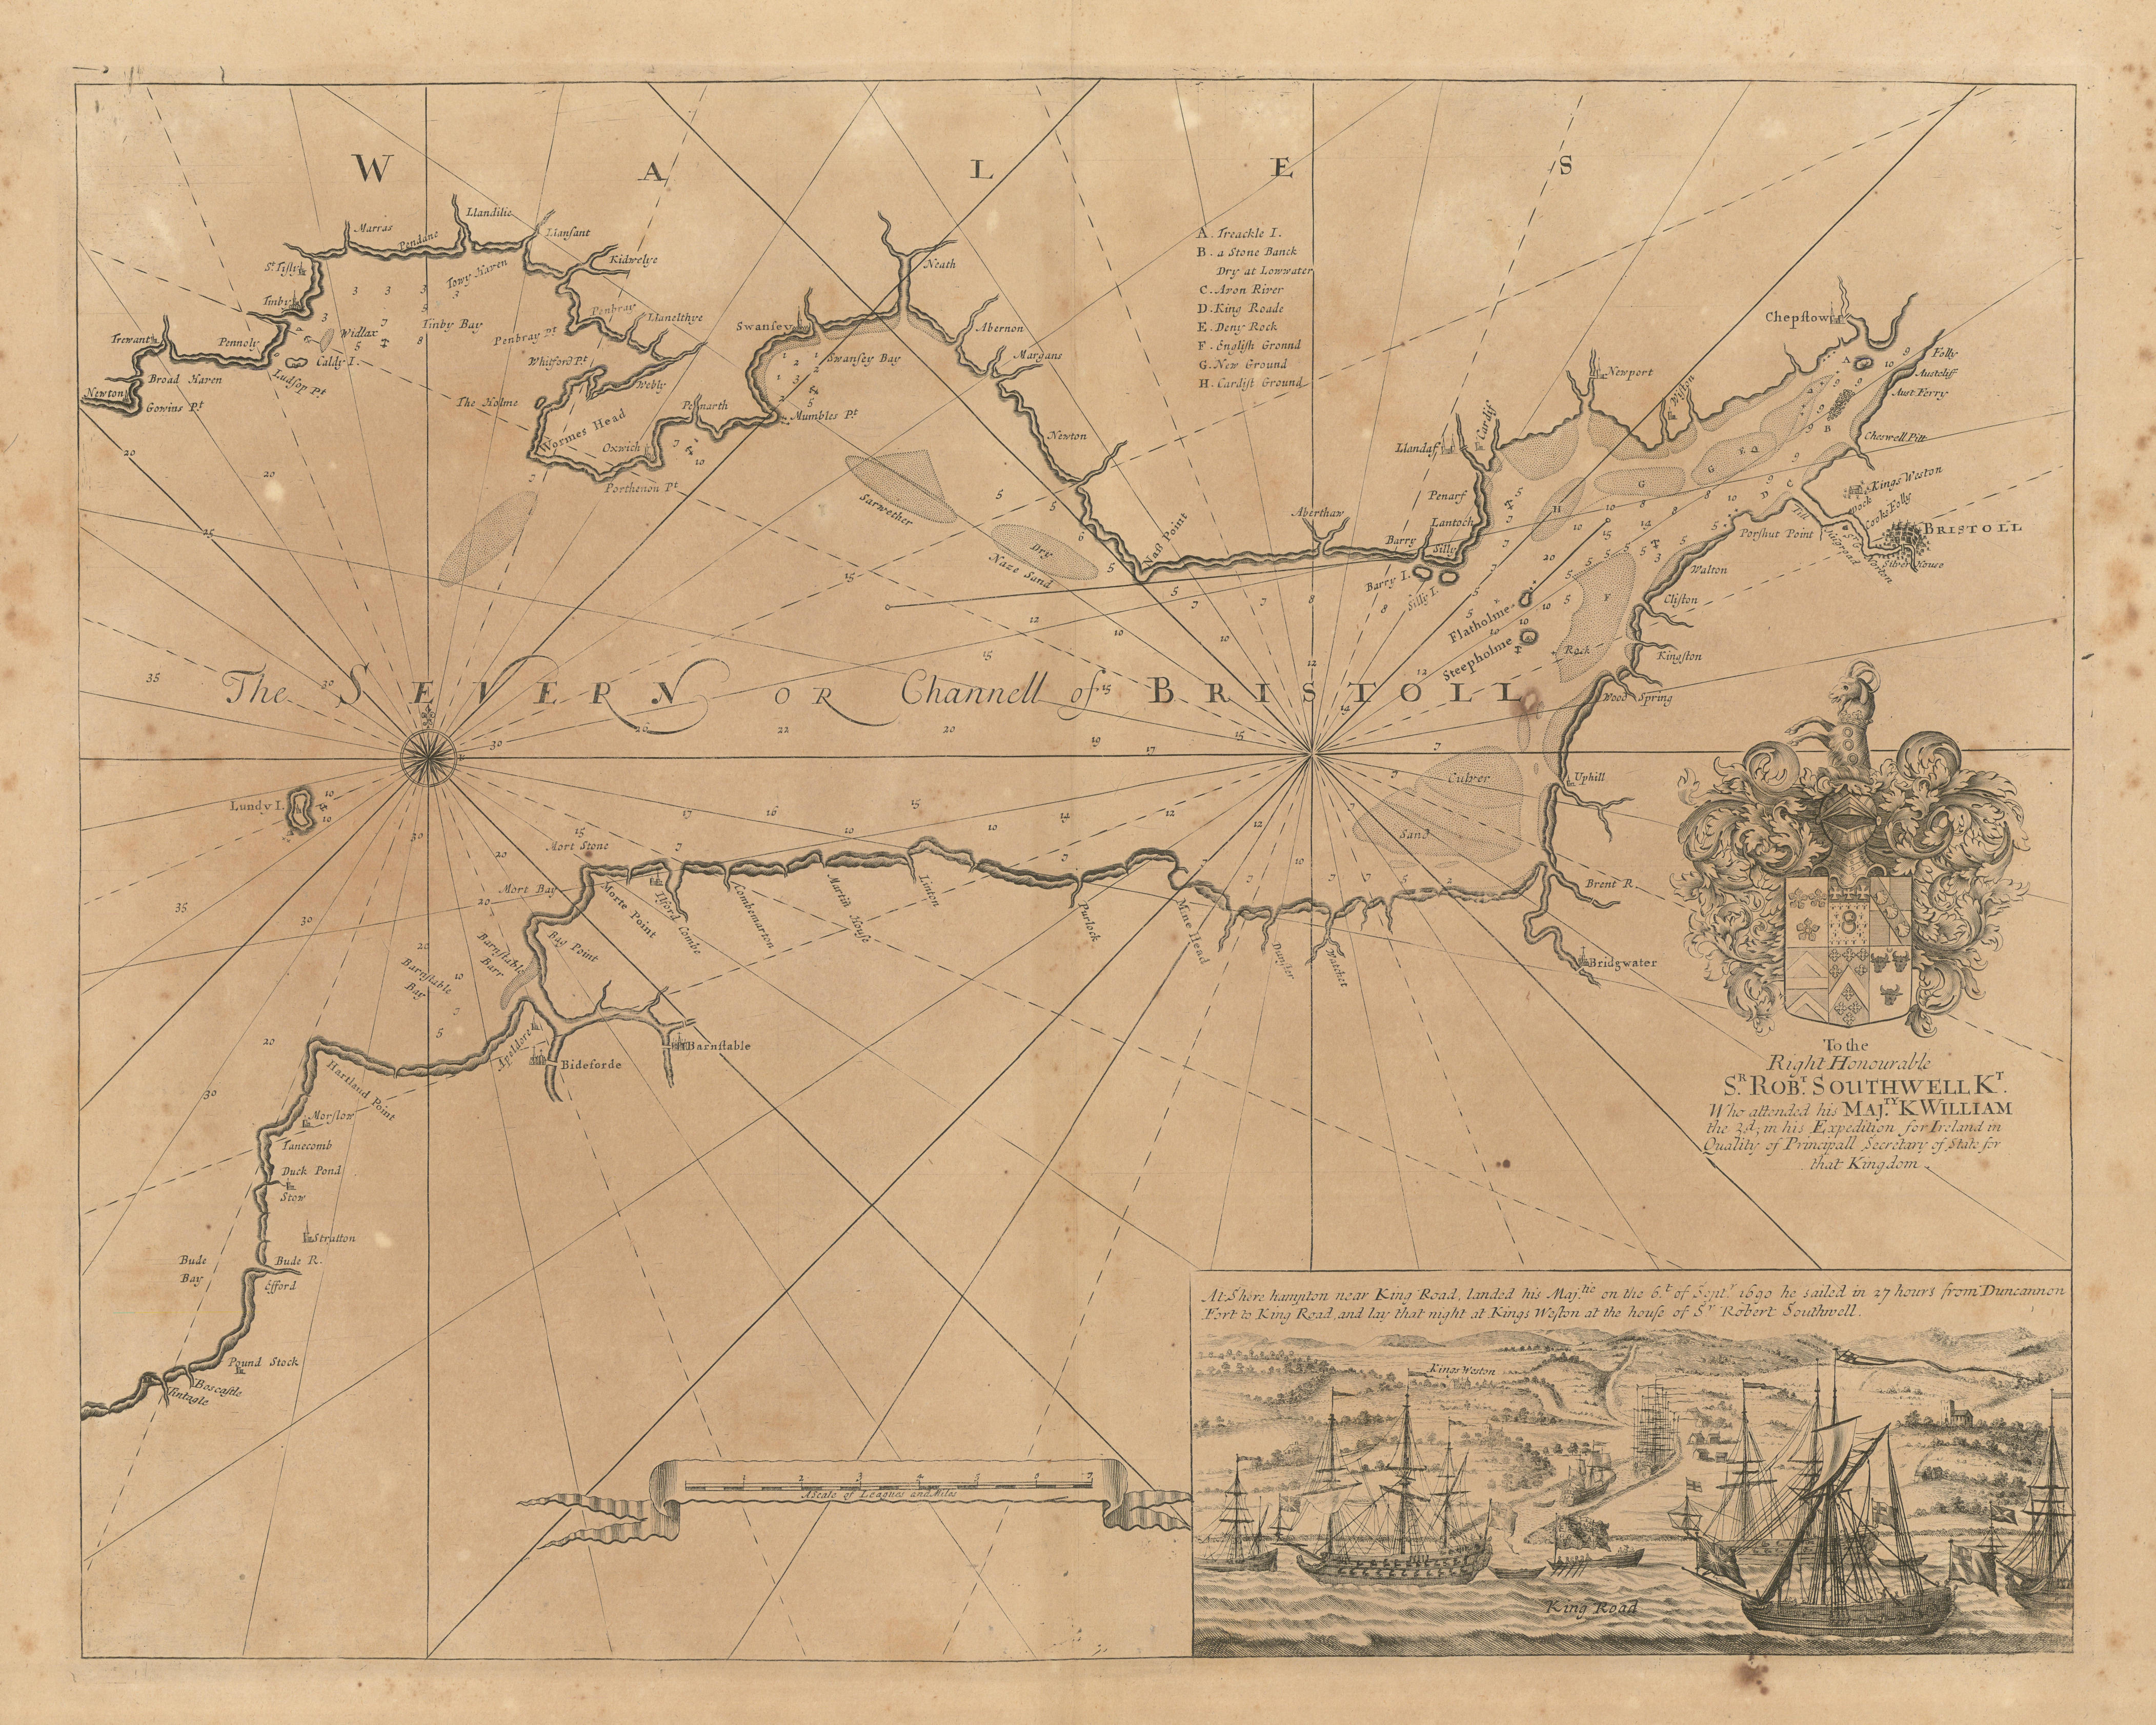 Associate Product The Severn or Channell of Bristoll sea/estuary chart by Capt COLLINS 1693 map